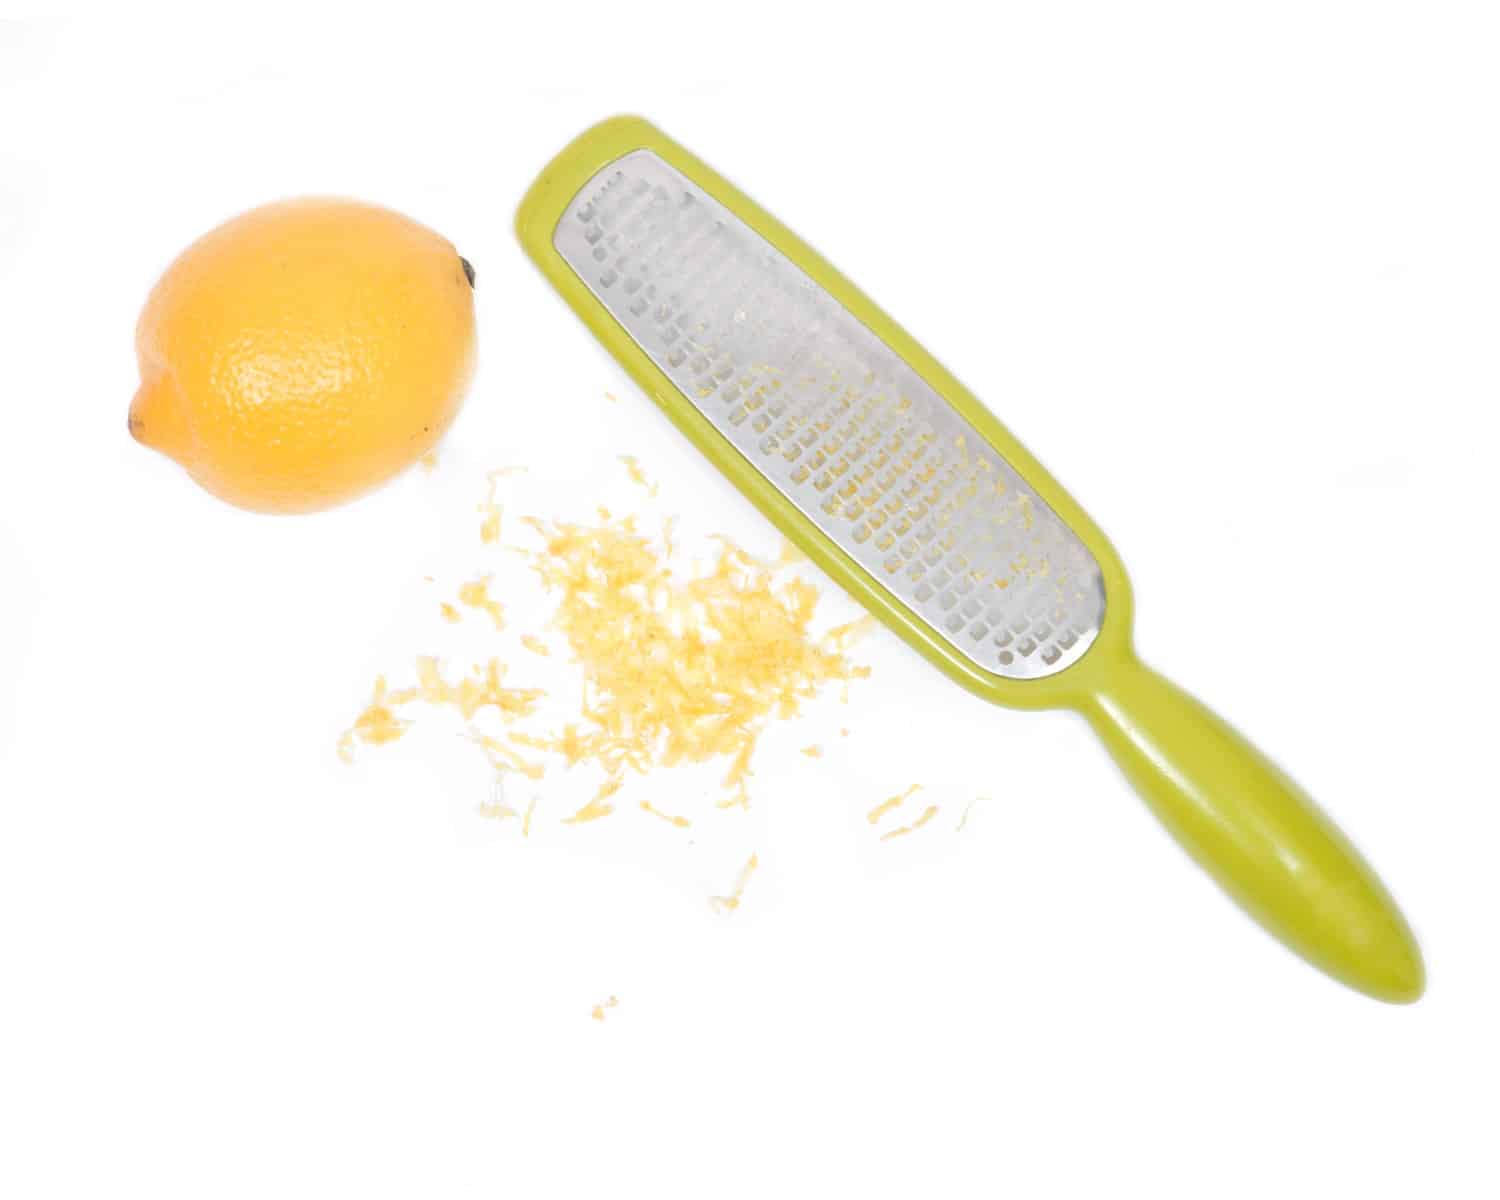 Lemon, lemon zest with microplane or on a white background.